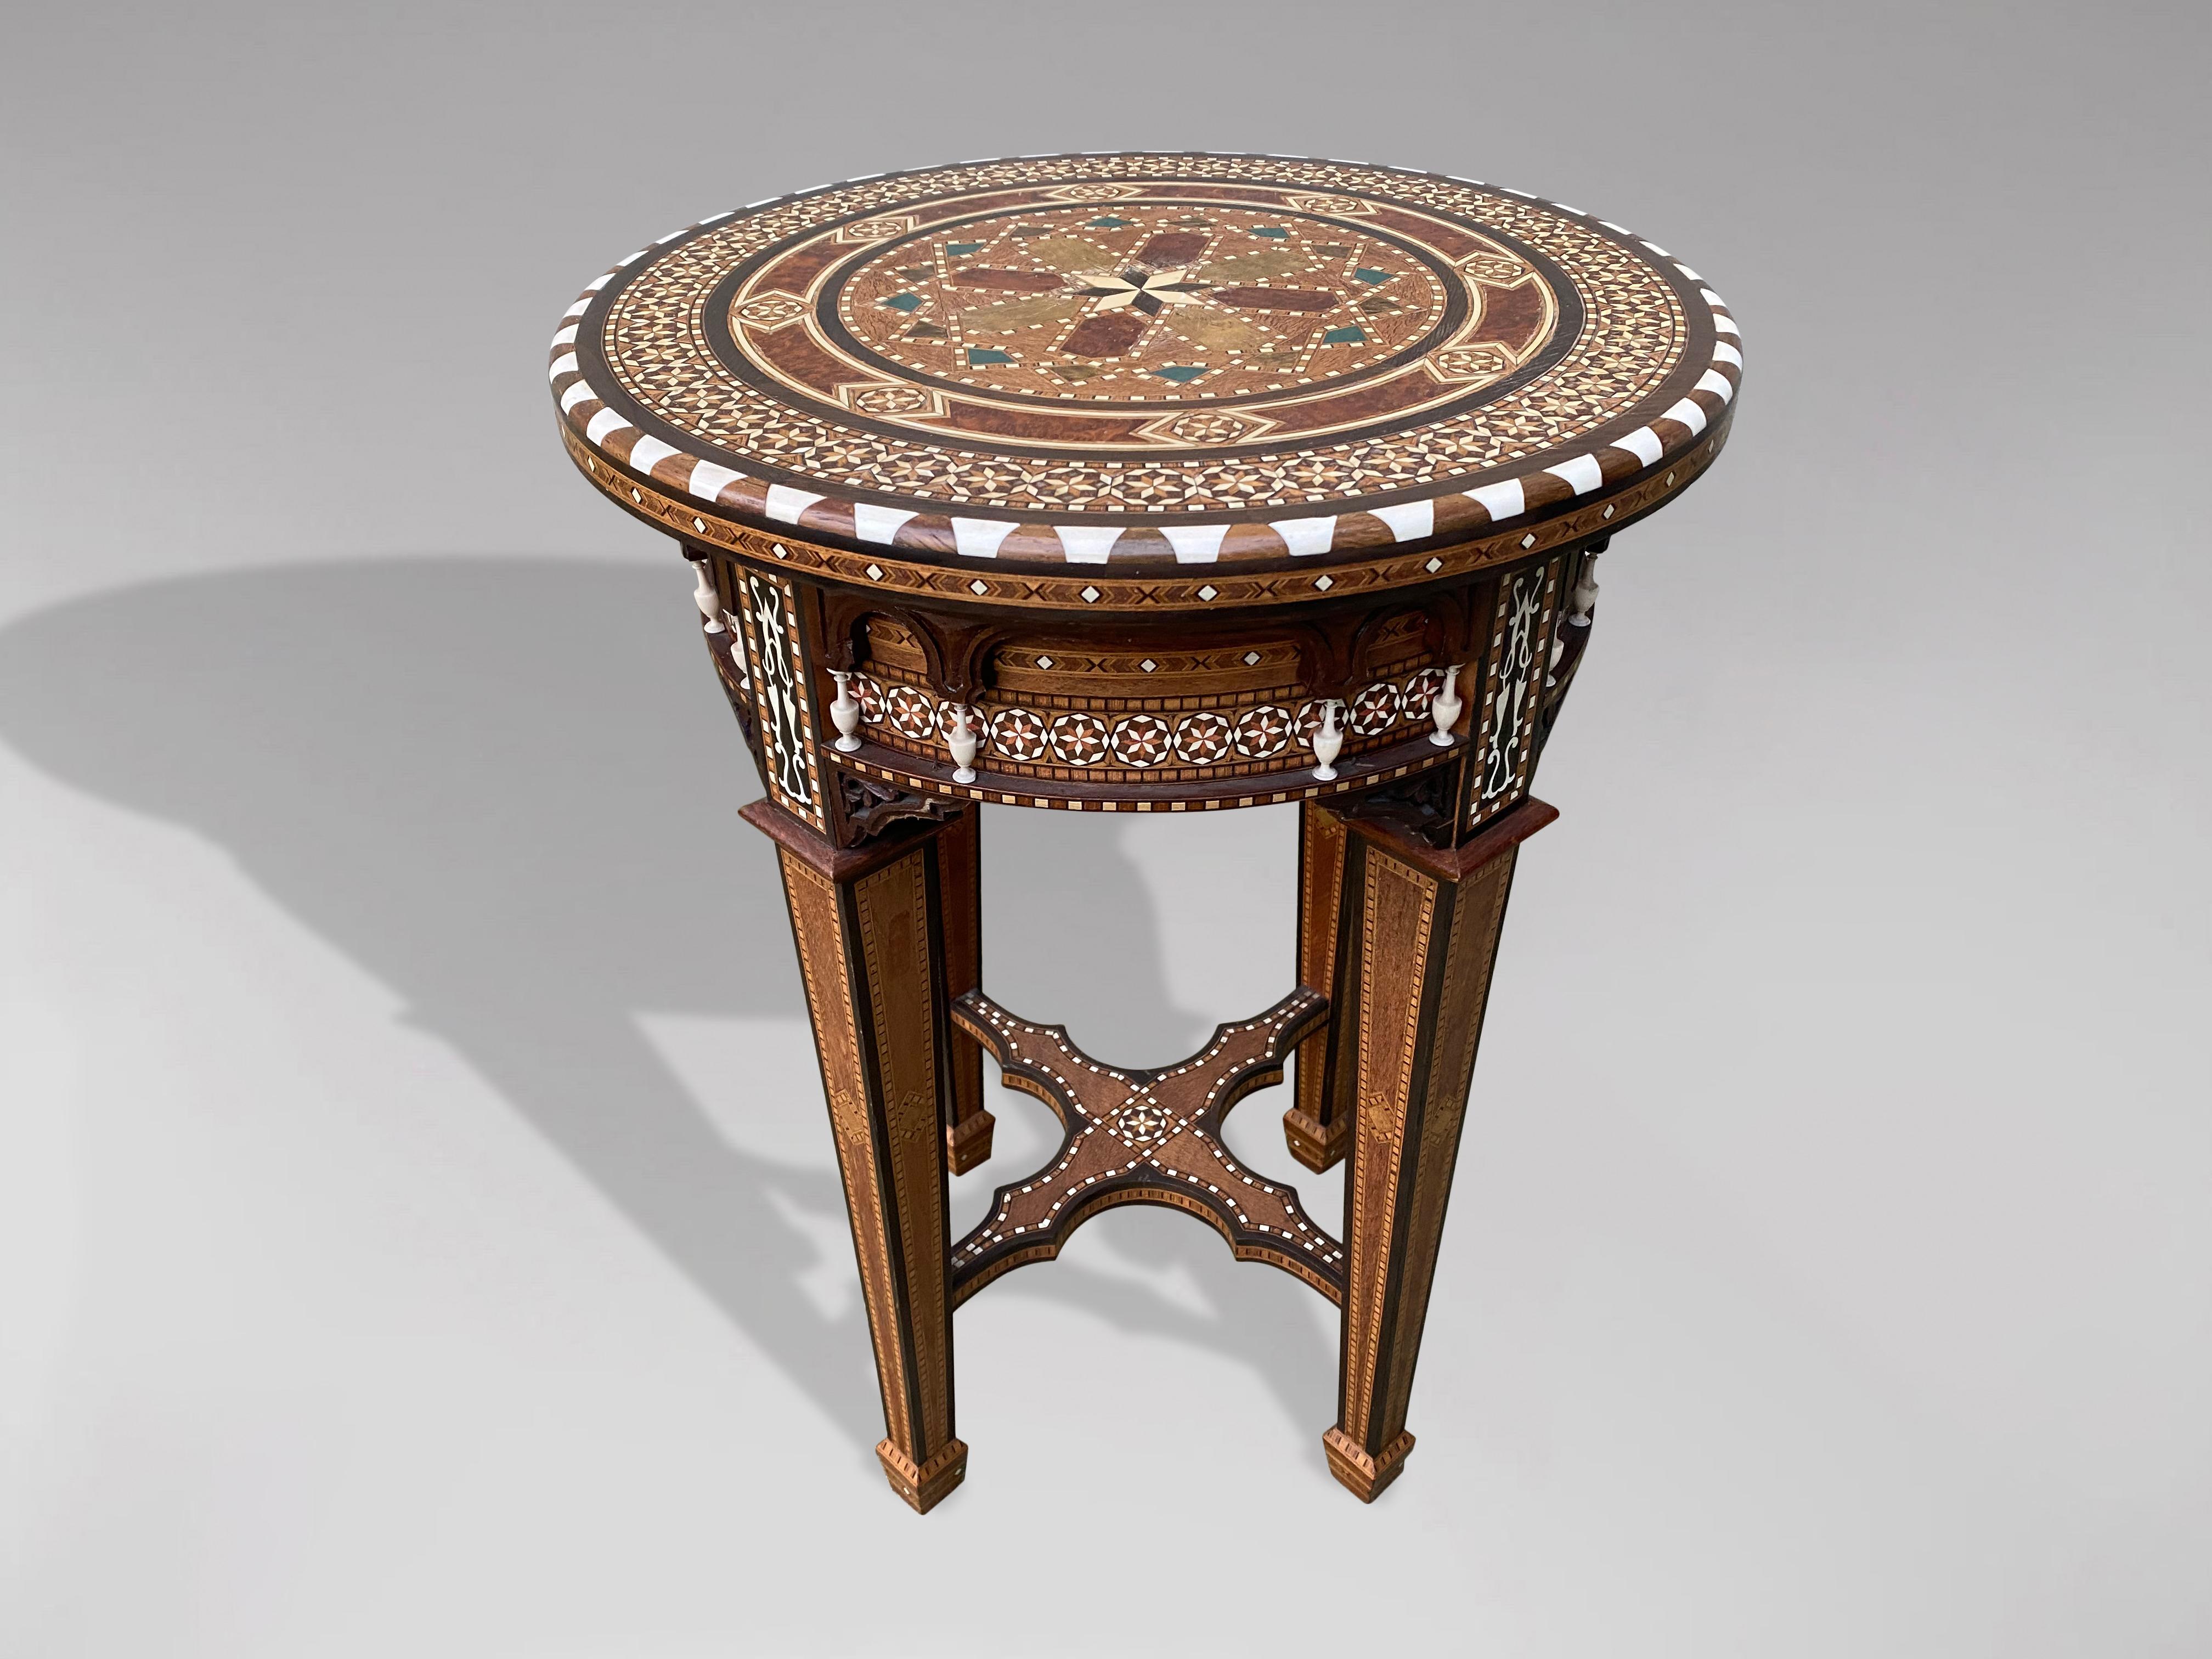 A fine late 19th century occasional table of circular form, inlaid with mosaic bone, ebony and other woods marquetry work throughout, having a shaped apron and raised upon square inlaid legs. This fine table is exquisitely handcrafted with beautiful